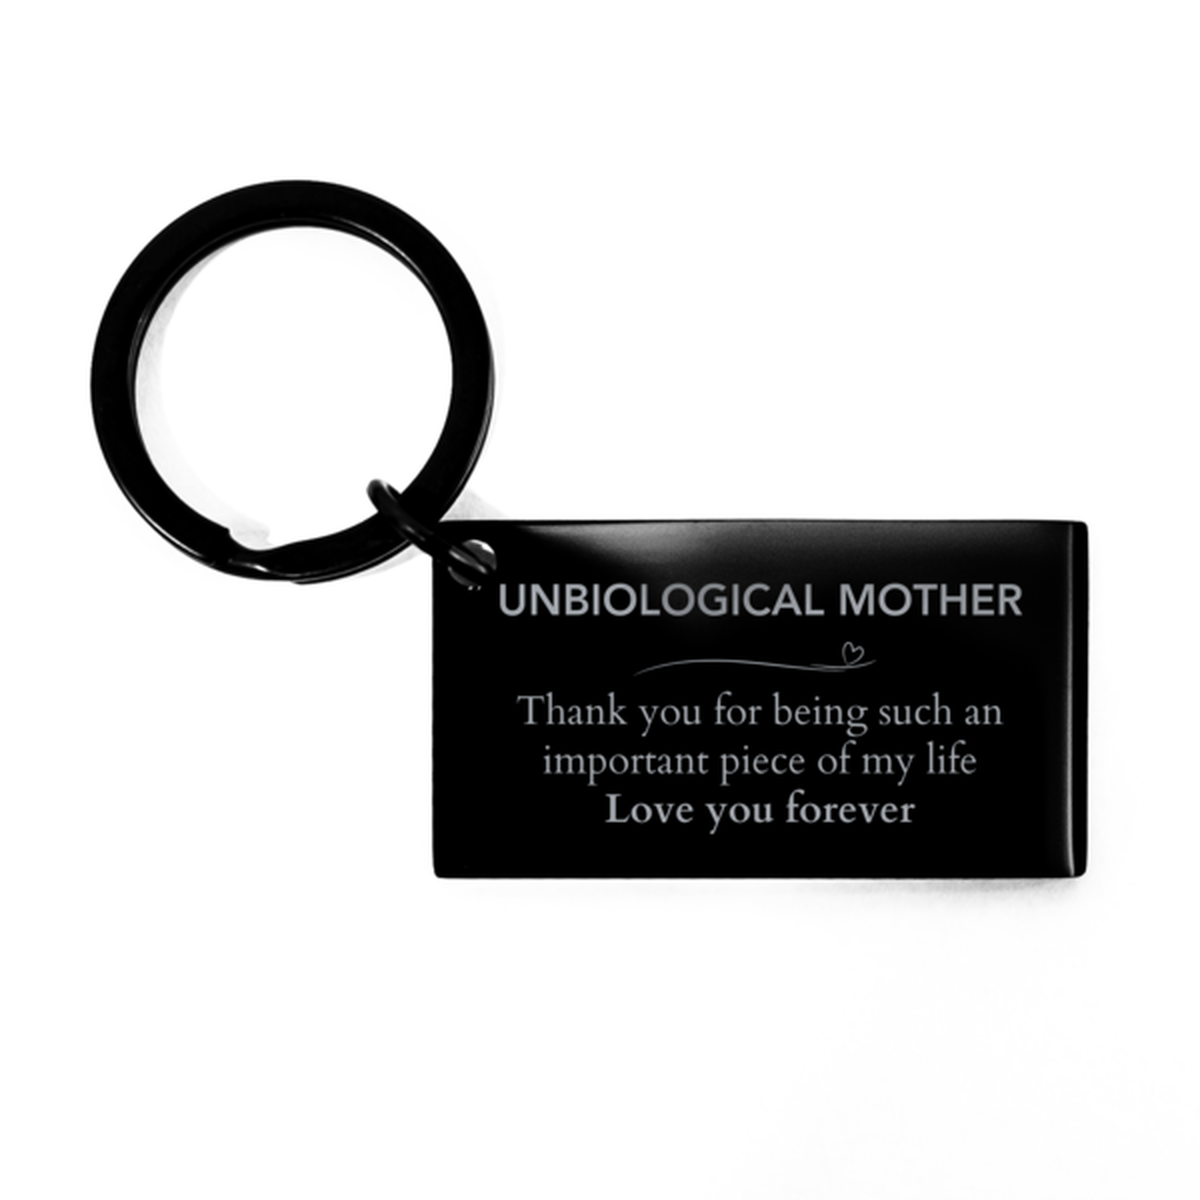 Appropriate Unbiological Mother Keychain Epic Birthday Gifts for Unbiological Mother Thank you for being such an important piece of my life Unbiological Mother Christmas Mothers Fathers Day